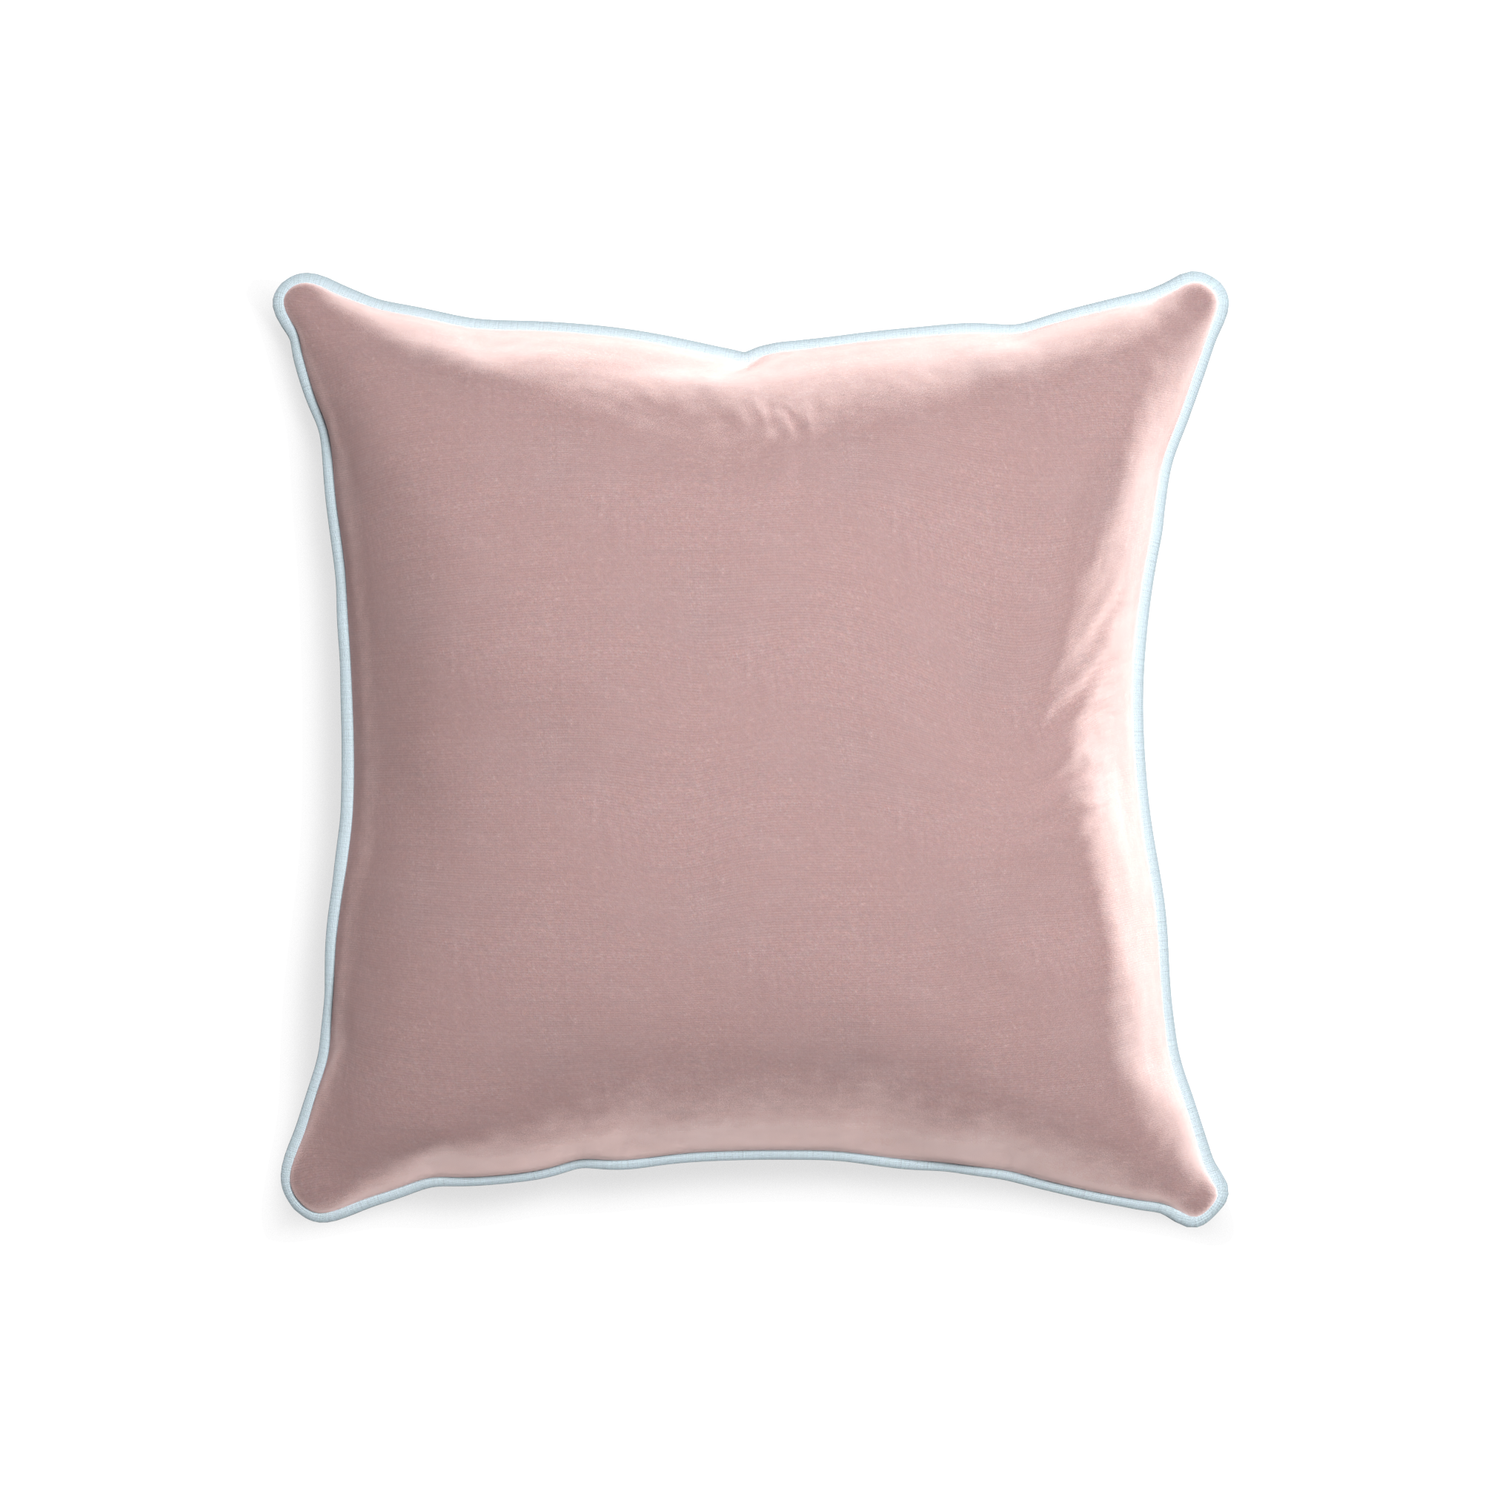 20-square mauve velvet custom pillow with powder piping on white background